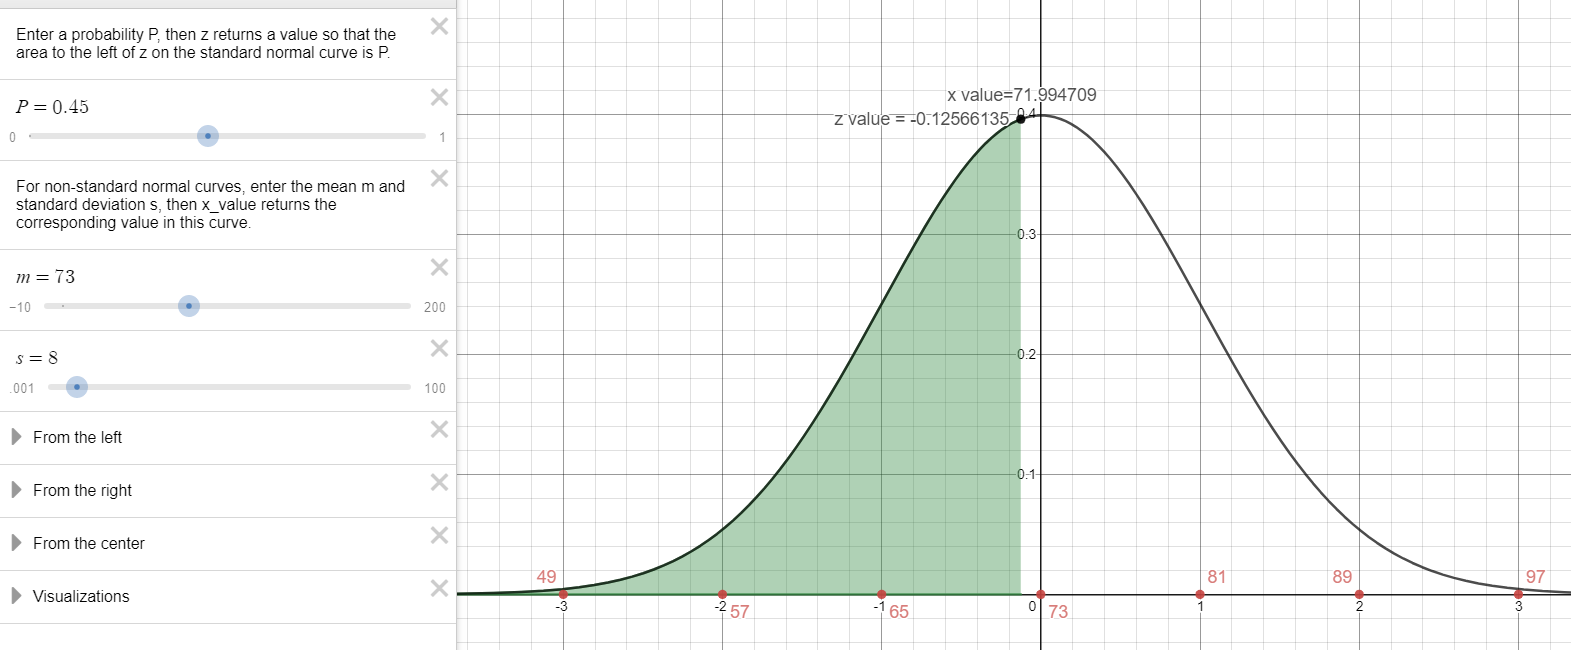 A normal curve with the mean of 100 at the highest point of the curve. The horizontal axis is labeled with 3 standard deviations to the left and to the right of the mean. The labels are 49, 57, 65, 73, 81, 89, and 97. In the left margin of the graph it is stated that p=.45, mean = 73 and standard deviation = 8. The calculated z value is -0.125661. The calculated x value is 71.99 pounds. The area under the curve is shaded to the left of the x value.